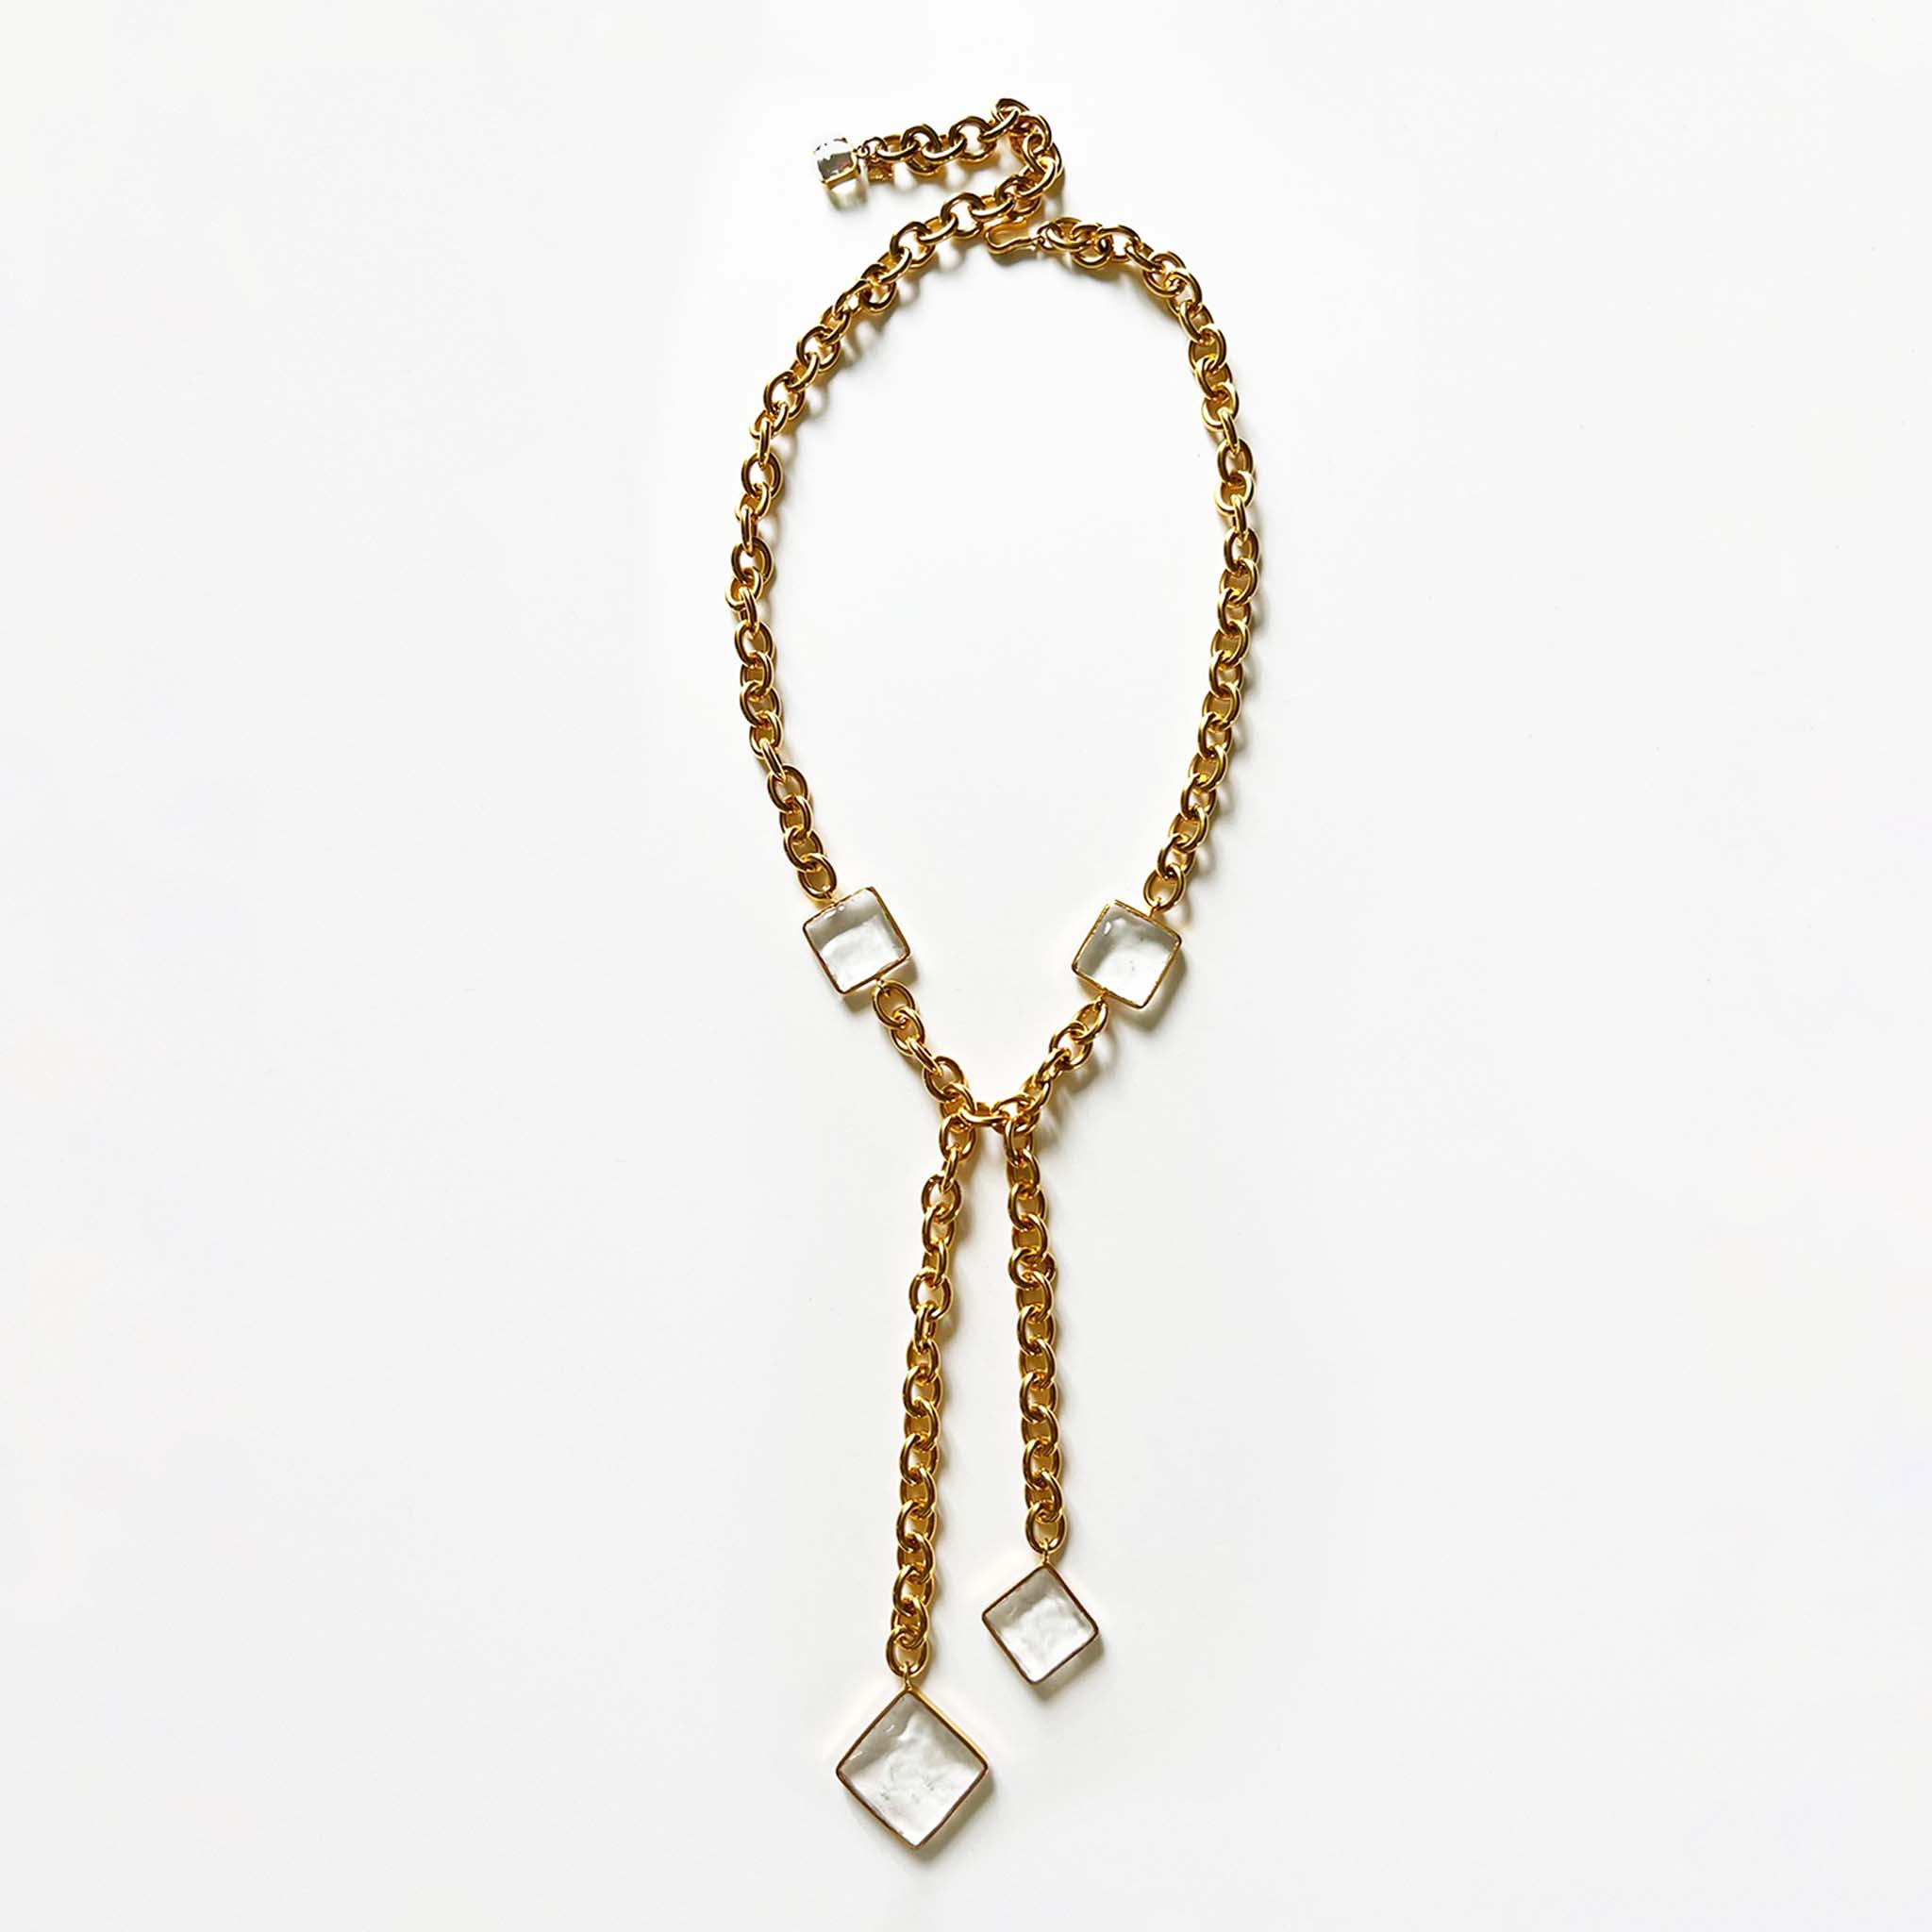 Pave & Chain Tie Necklace